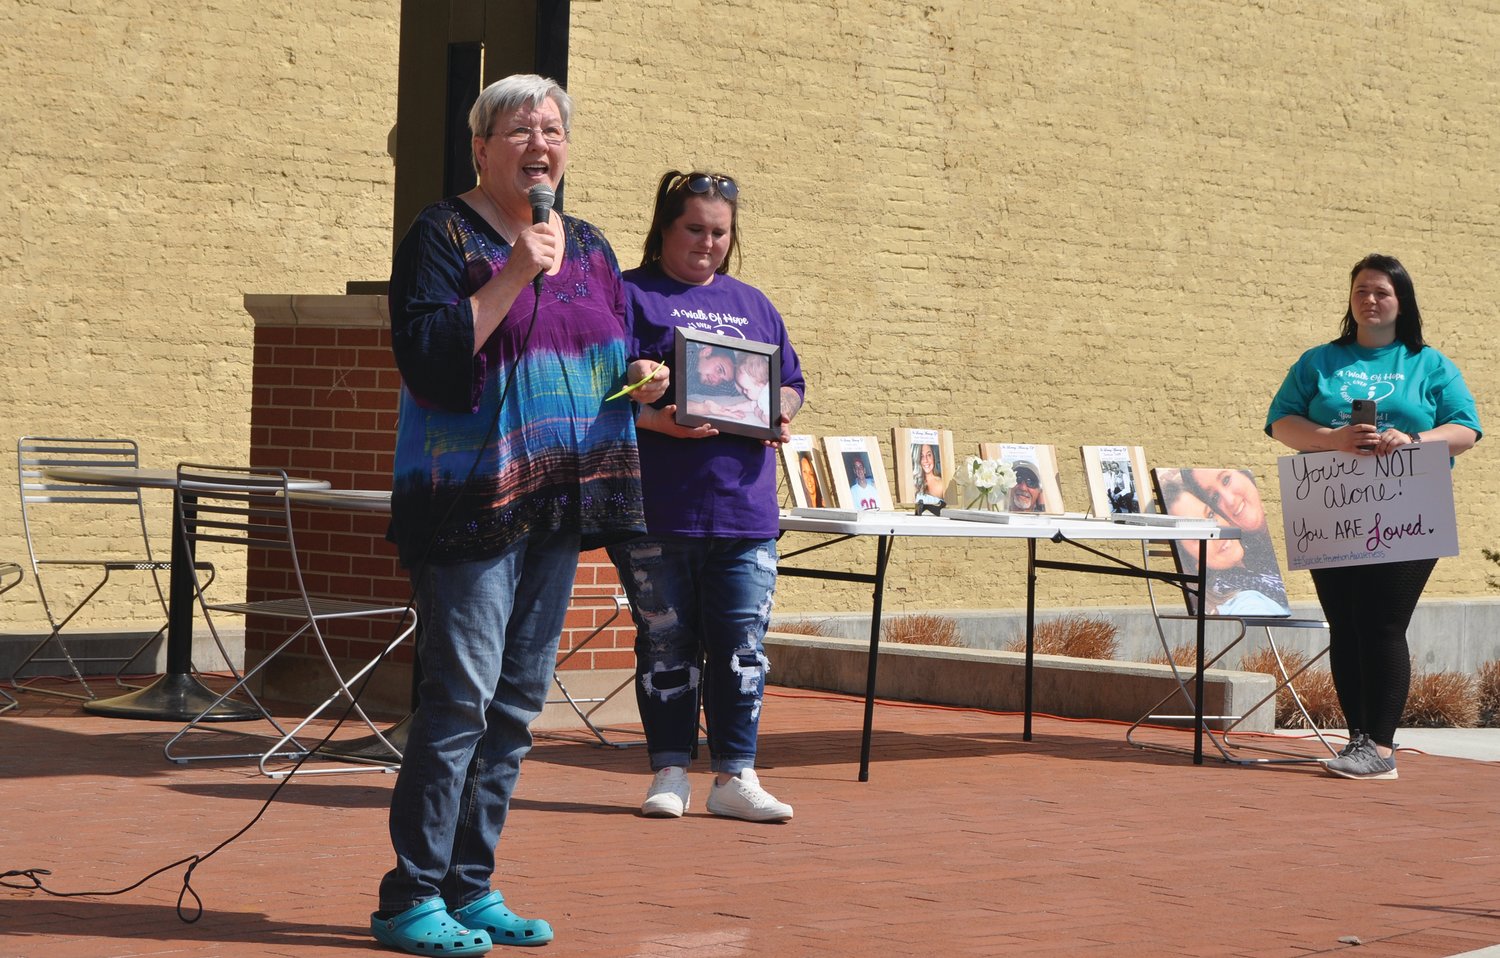 Jocele Harrison, first from left, speaks about her son Harold Barclay, who died by suicide, at the Walk of Hope at Pike Place Monday. Walk co-organizer Kaylie Edwards holds a photo of Barclay and his daughter, Lily, and Taylor Ratcliff holds a sign for suicide prevention awareness.